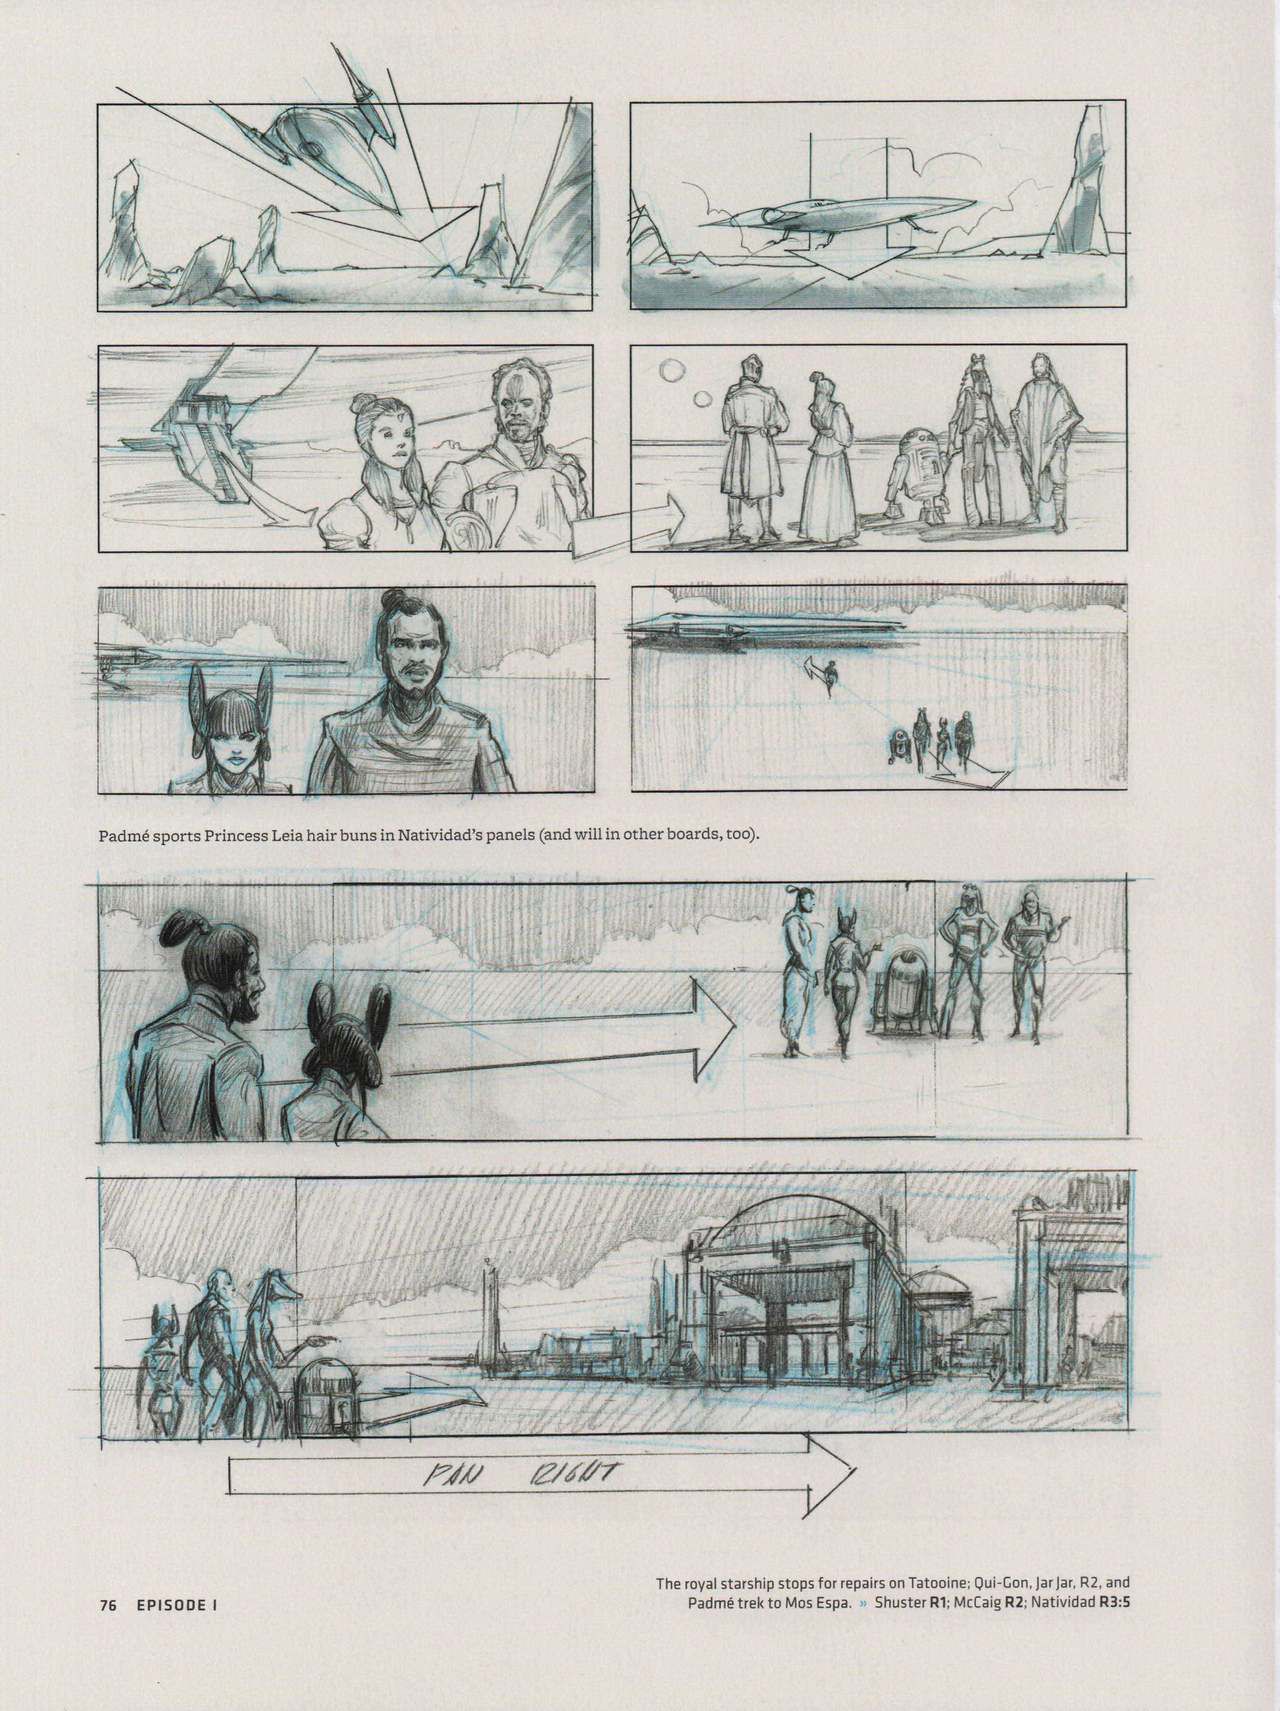 Star Wars Storyboards - The Prequel Trilogy 80